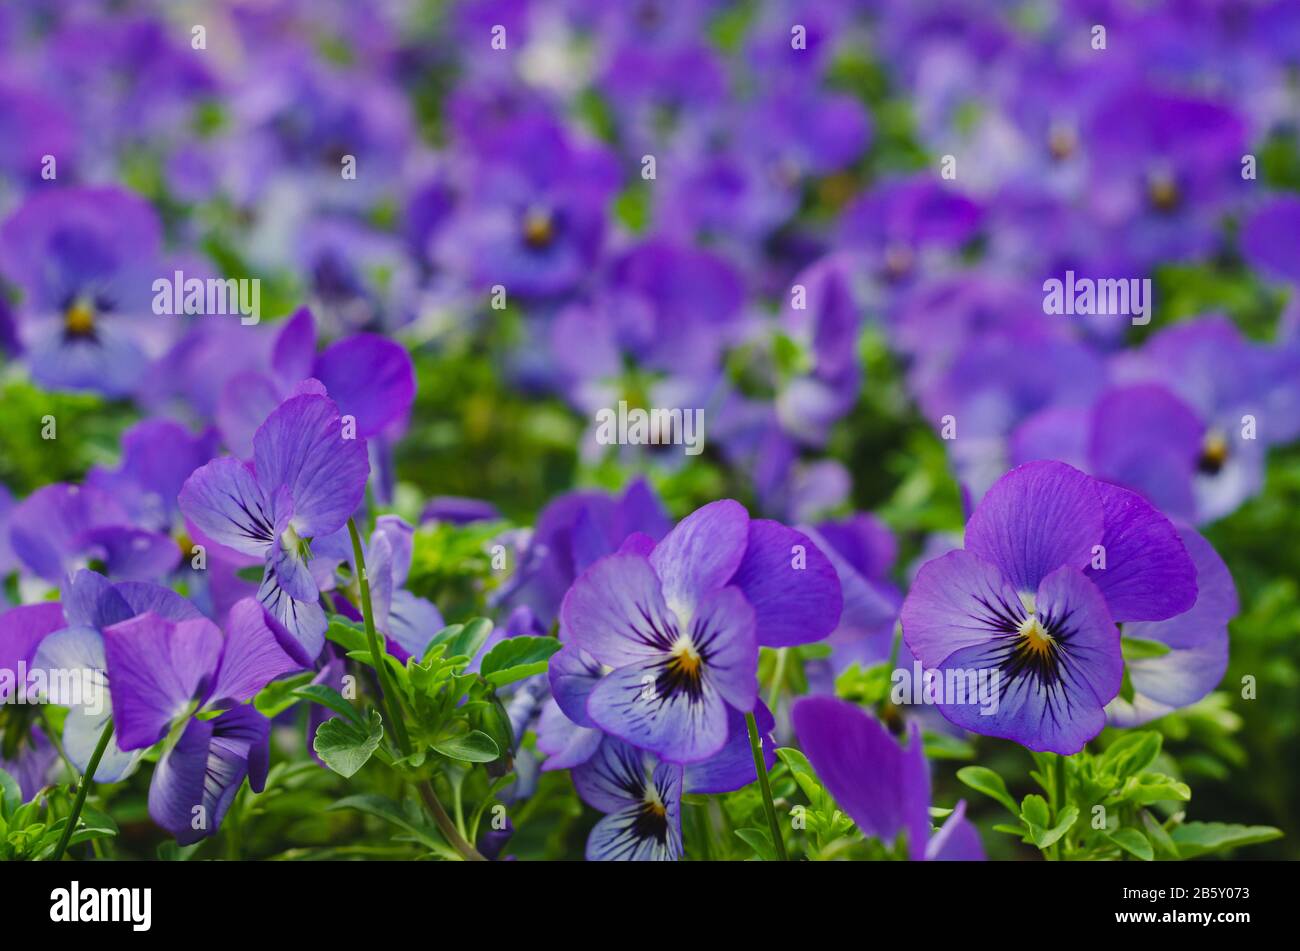 Purple Horned Pansy flowers in garden for spring season concept. Stock Photo